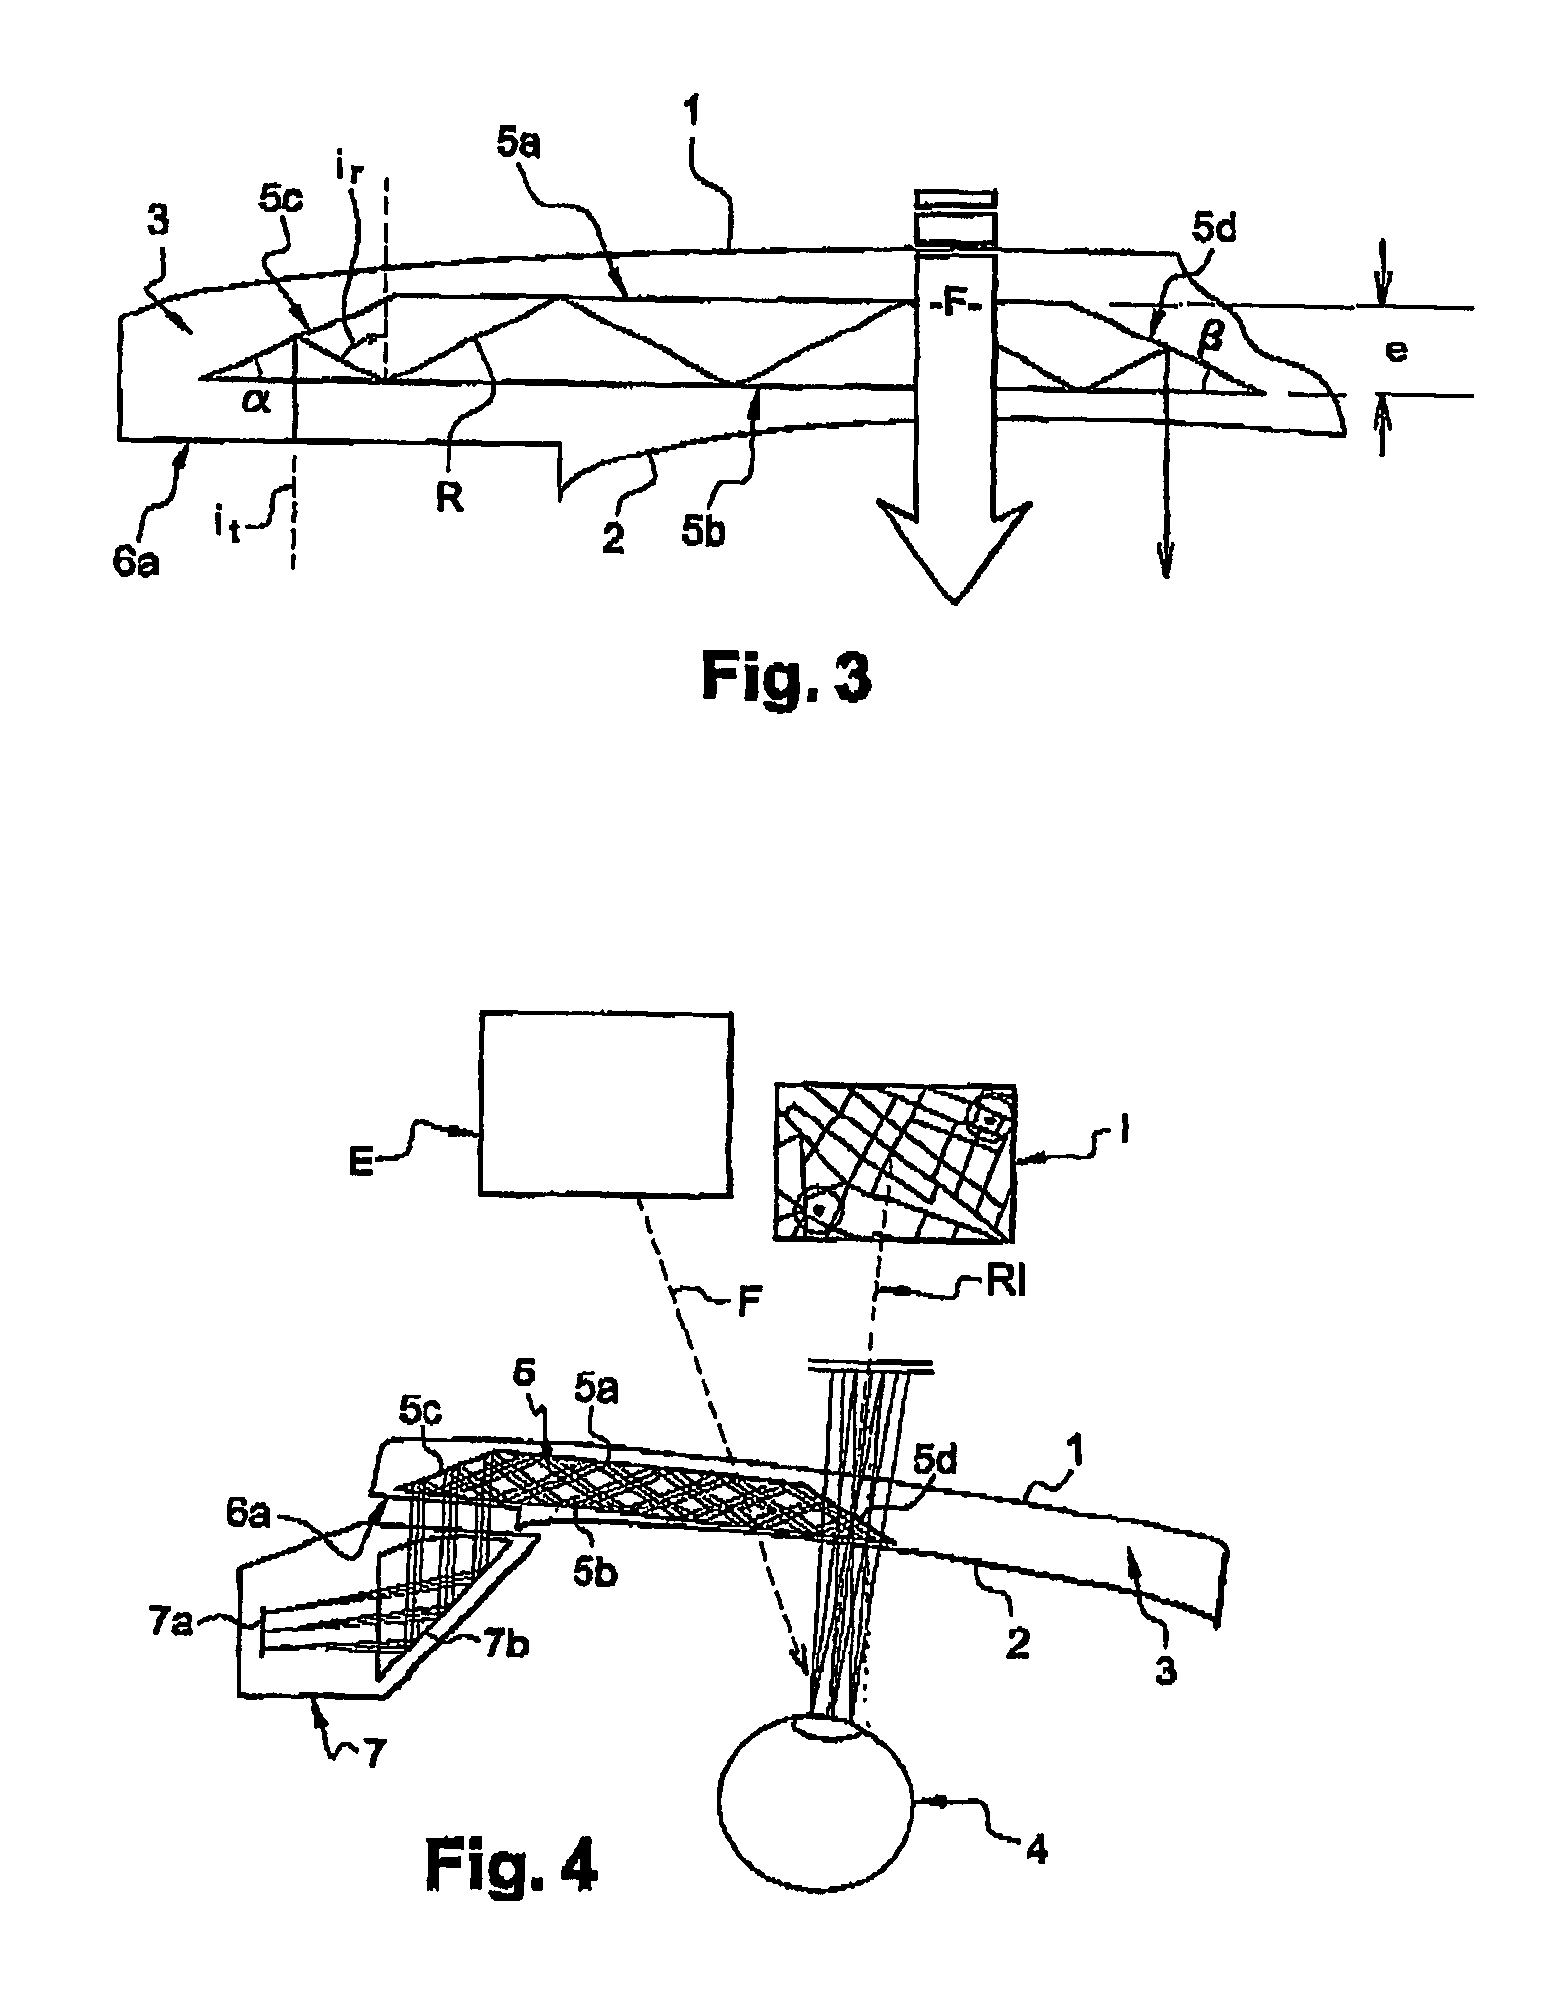 Method of manufacturing an ophthalmic lens for providing an optical display